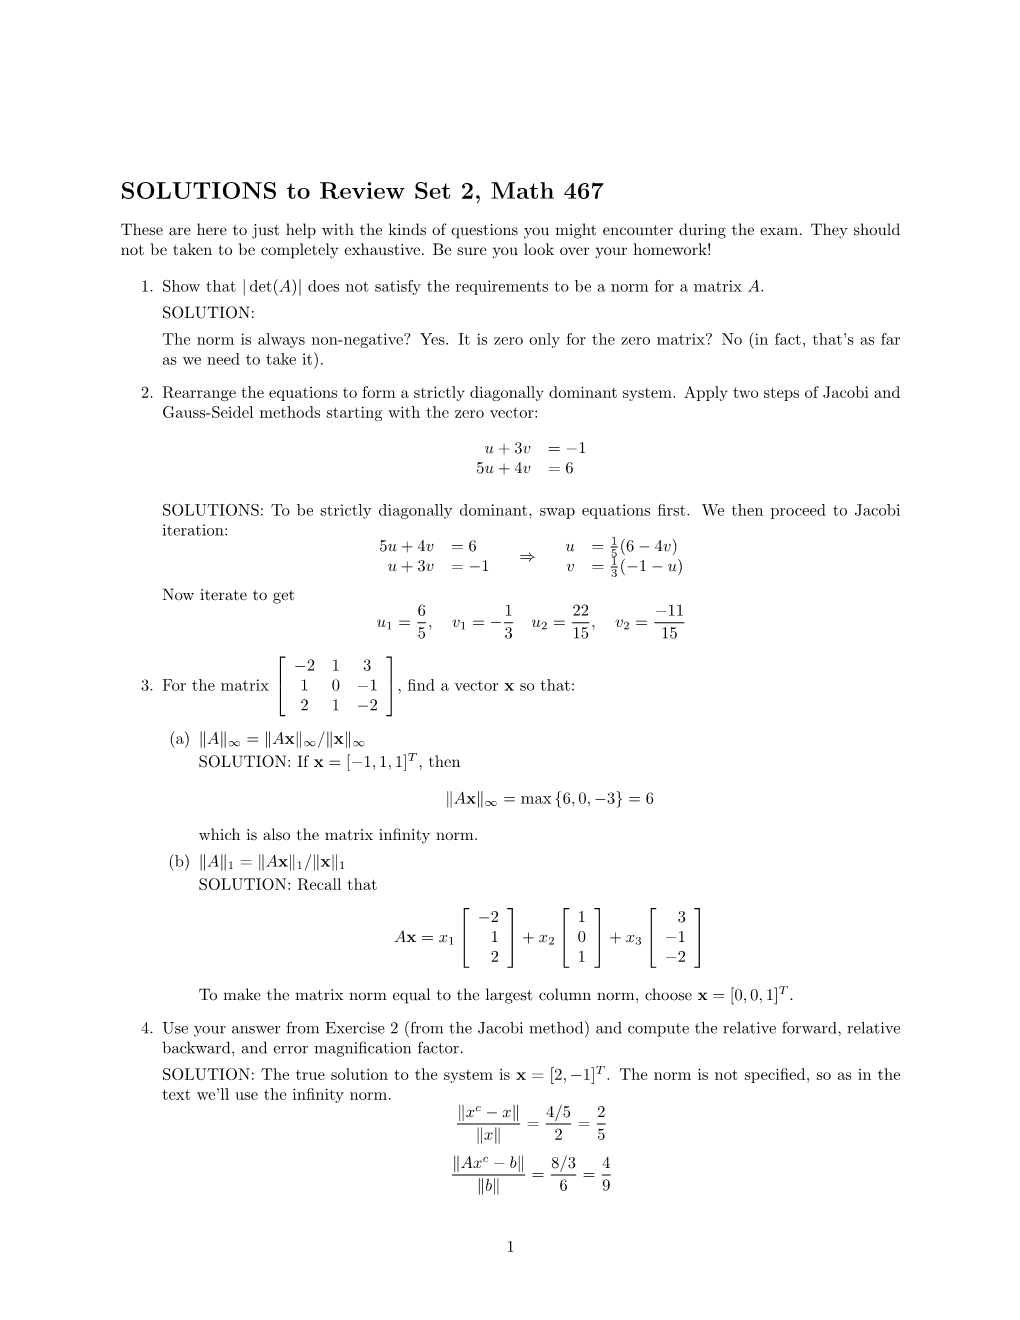 SOLUTIONS to Review Set 2, Math 467